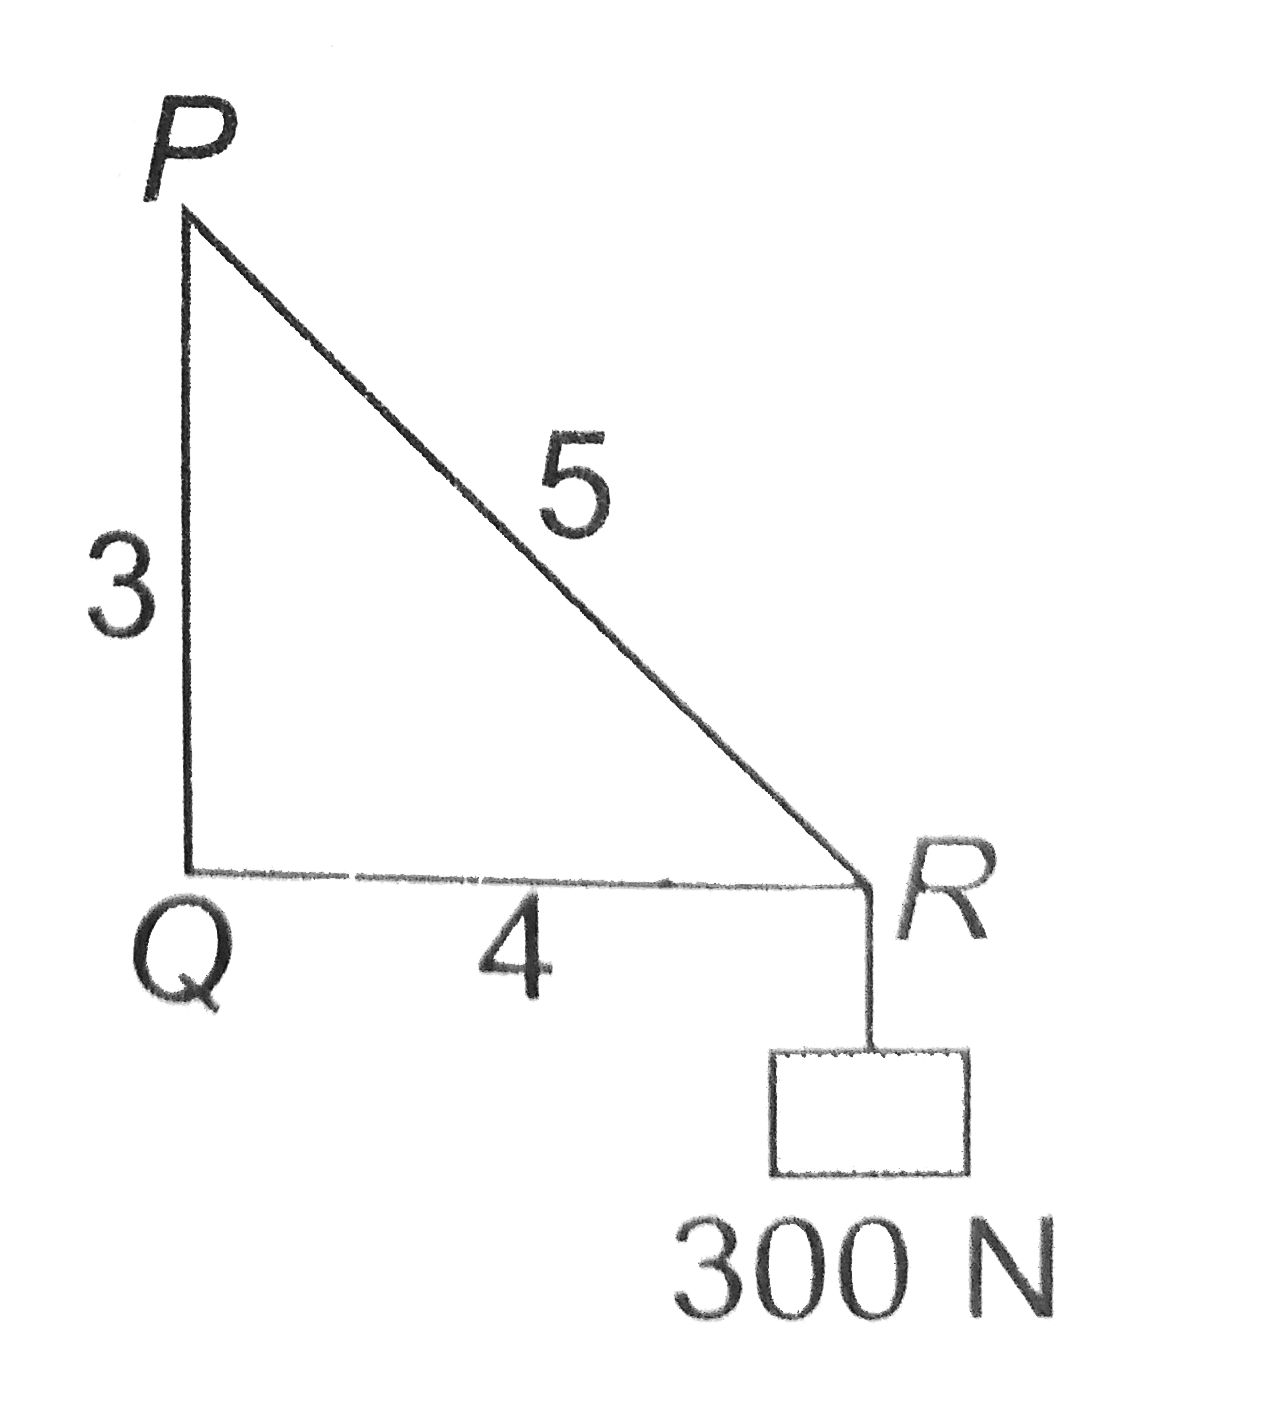 Three light rods from a right angled triangle. The tension in the rod PR, if a force of 300N is applied vertically downward at R is.